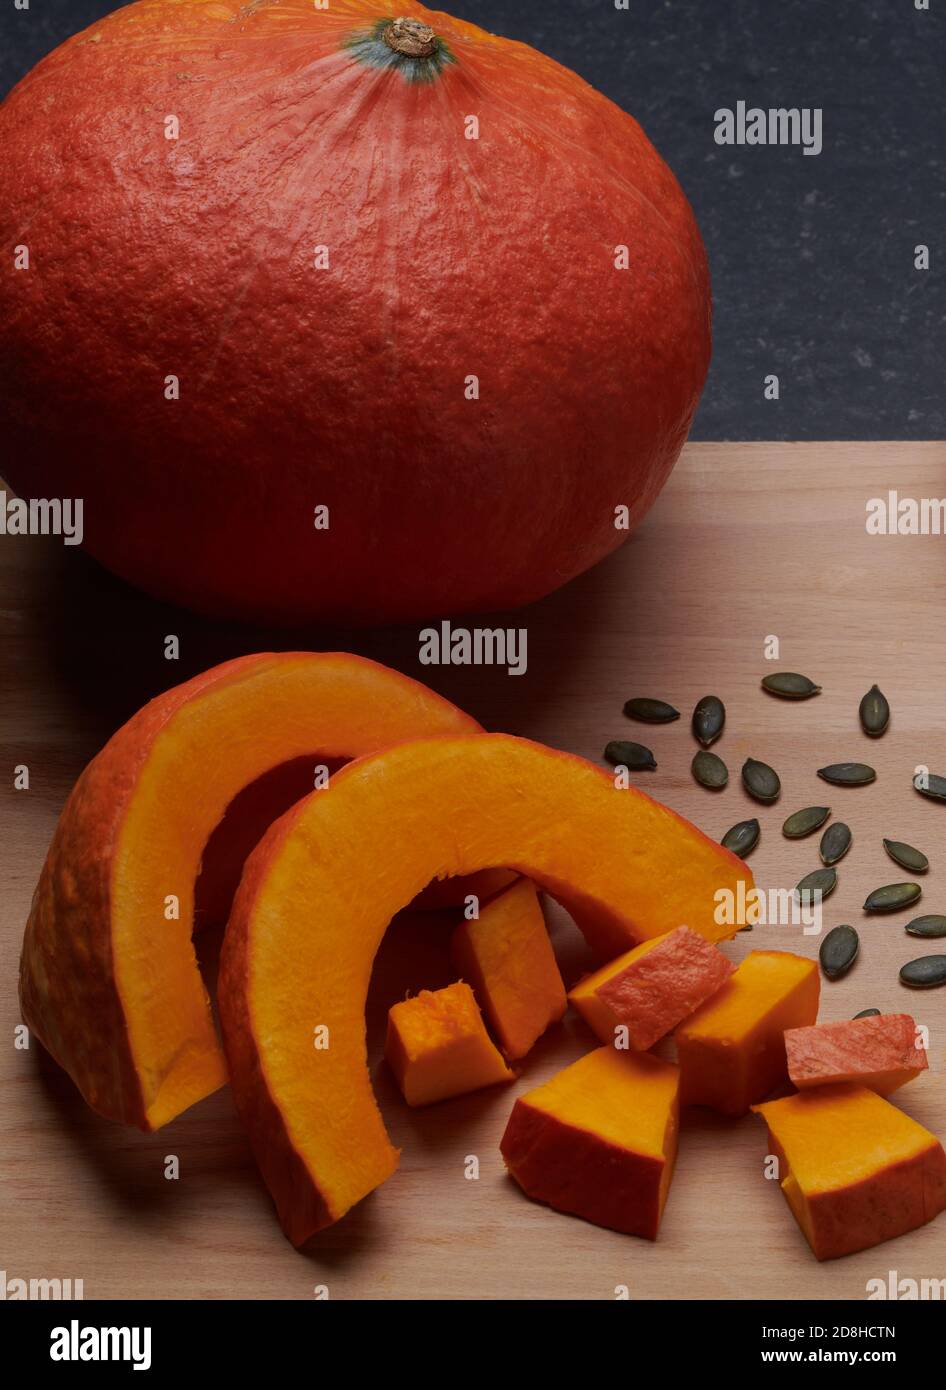 Orange round pumpkin, whole and sliced, with its seeds on a wooden cutting board Stock Photo